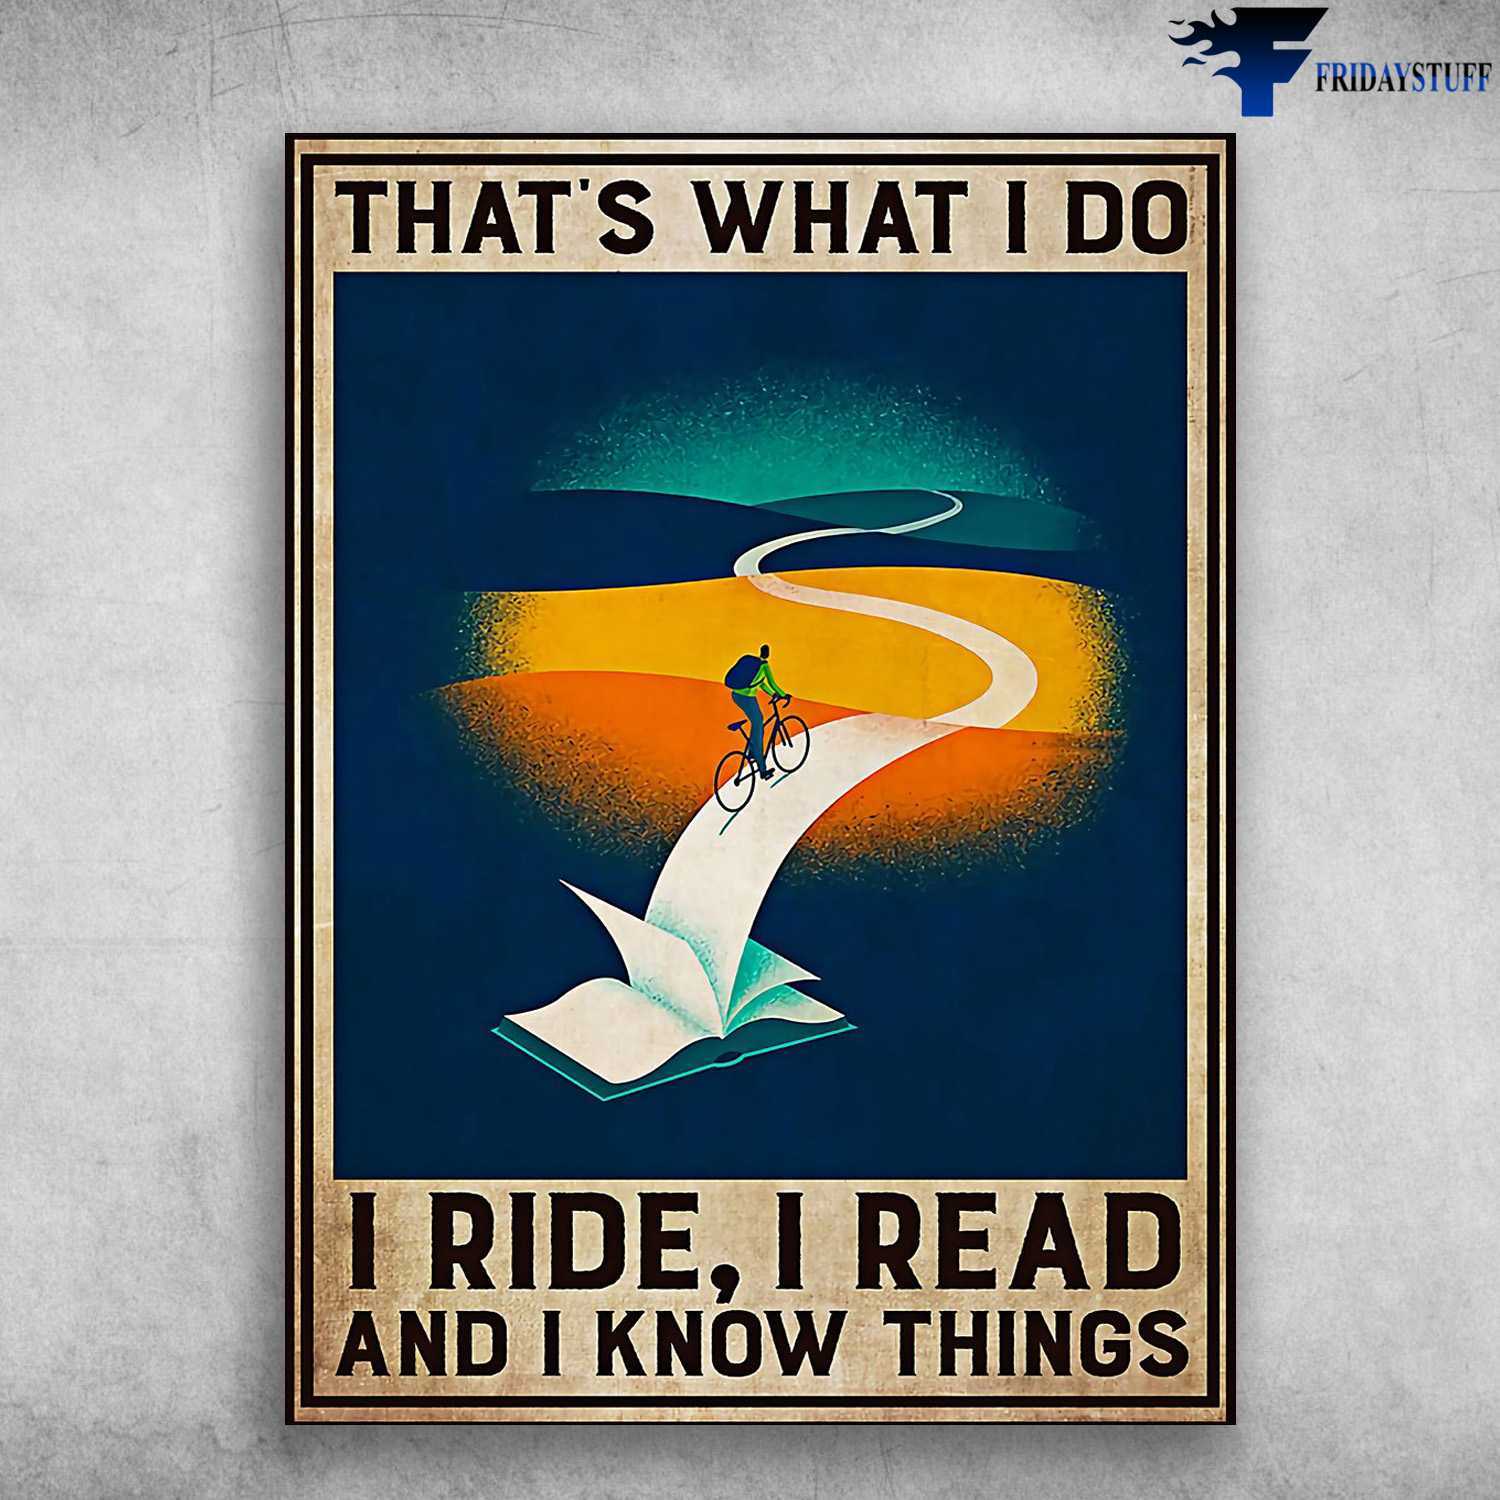 Book And Bicycle - That's What I Do, I Ride, I Read, And I Know Things